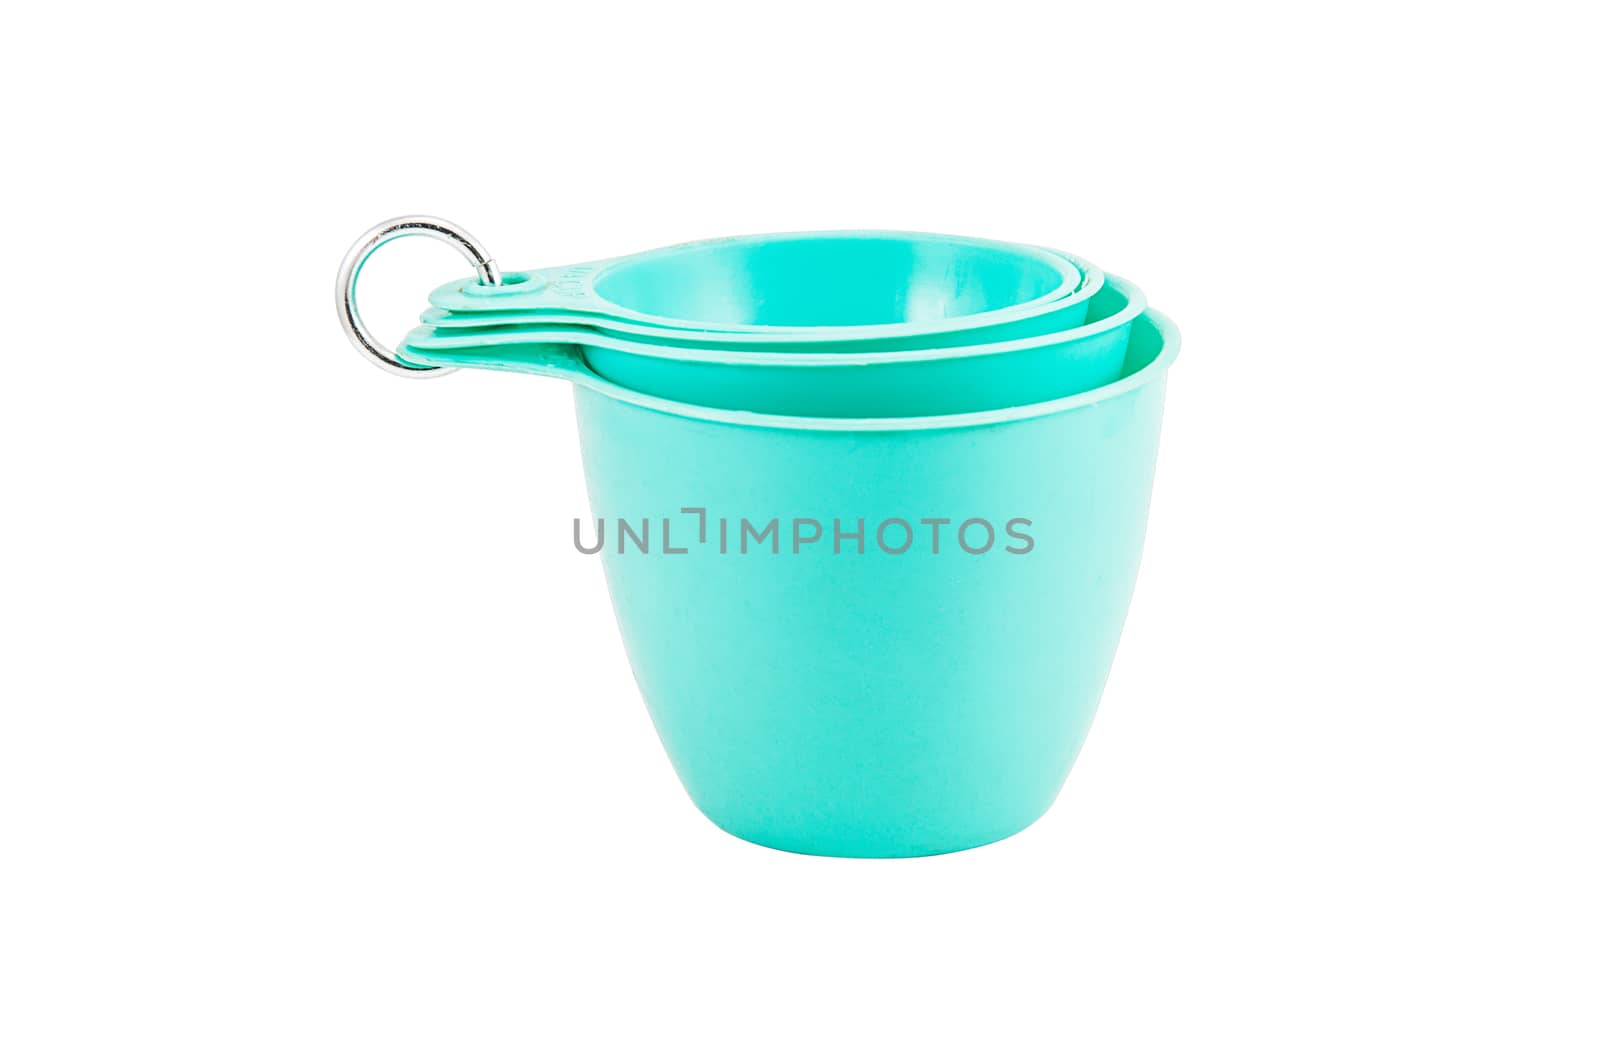 Four plastic measuring cups isolated on white background with clipping path